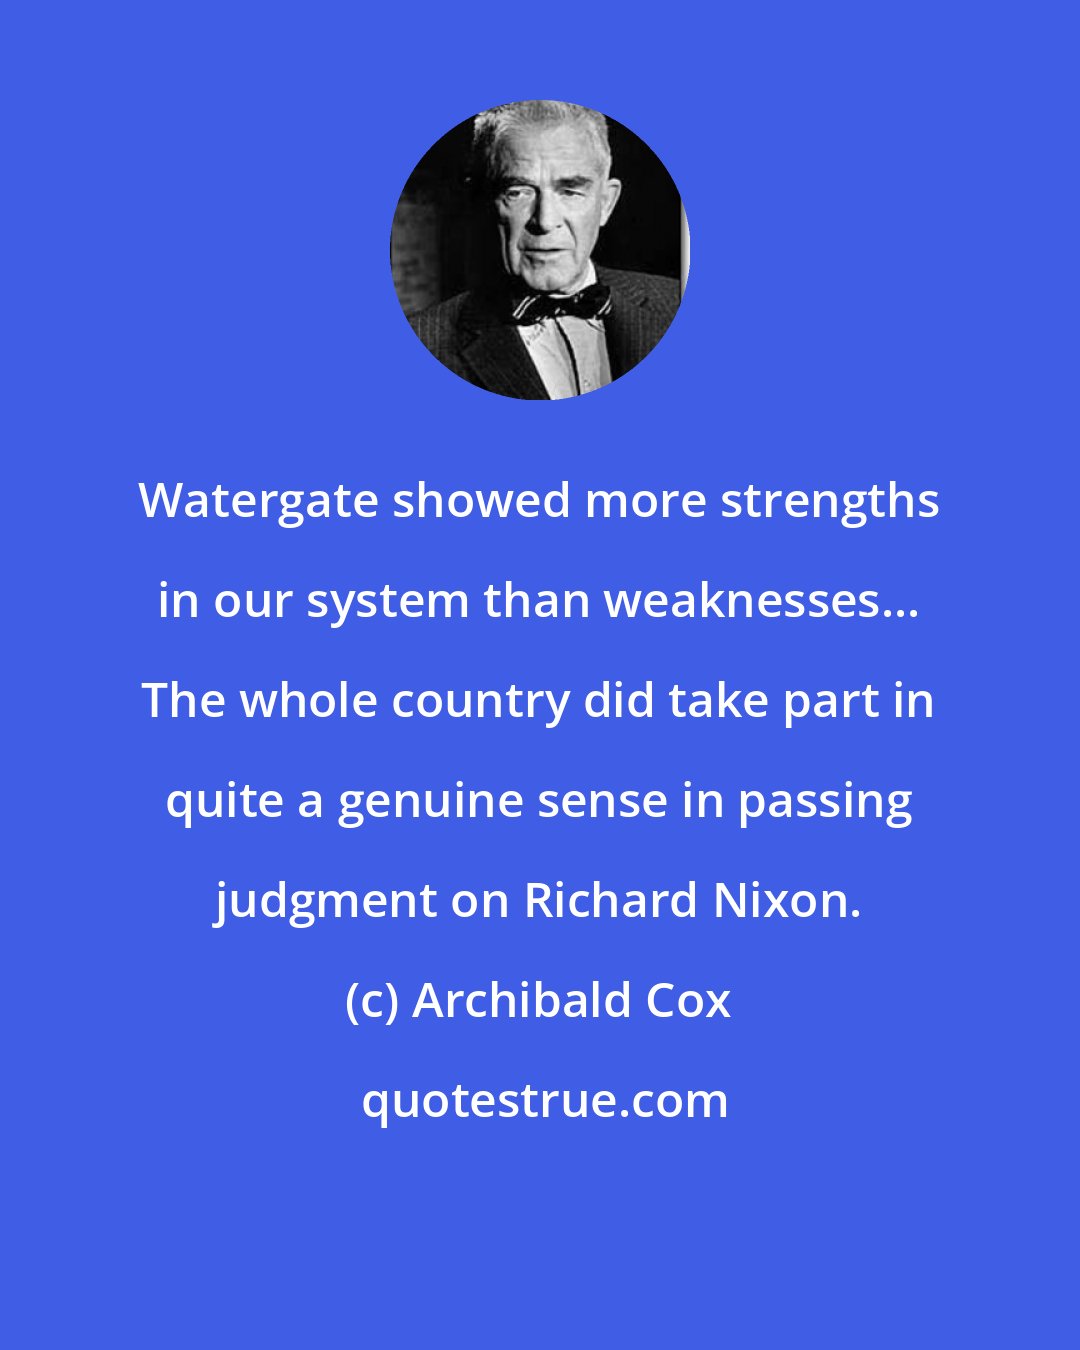 Archibald Cox: Watergate showed more strengths in our system than weaknesses... The whole country did take part in quite a genuine sense in passing judgment on Richard Nixon.